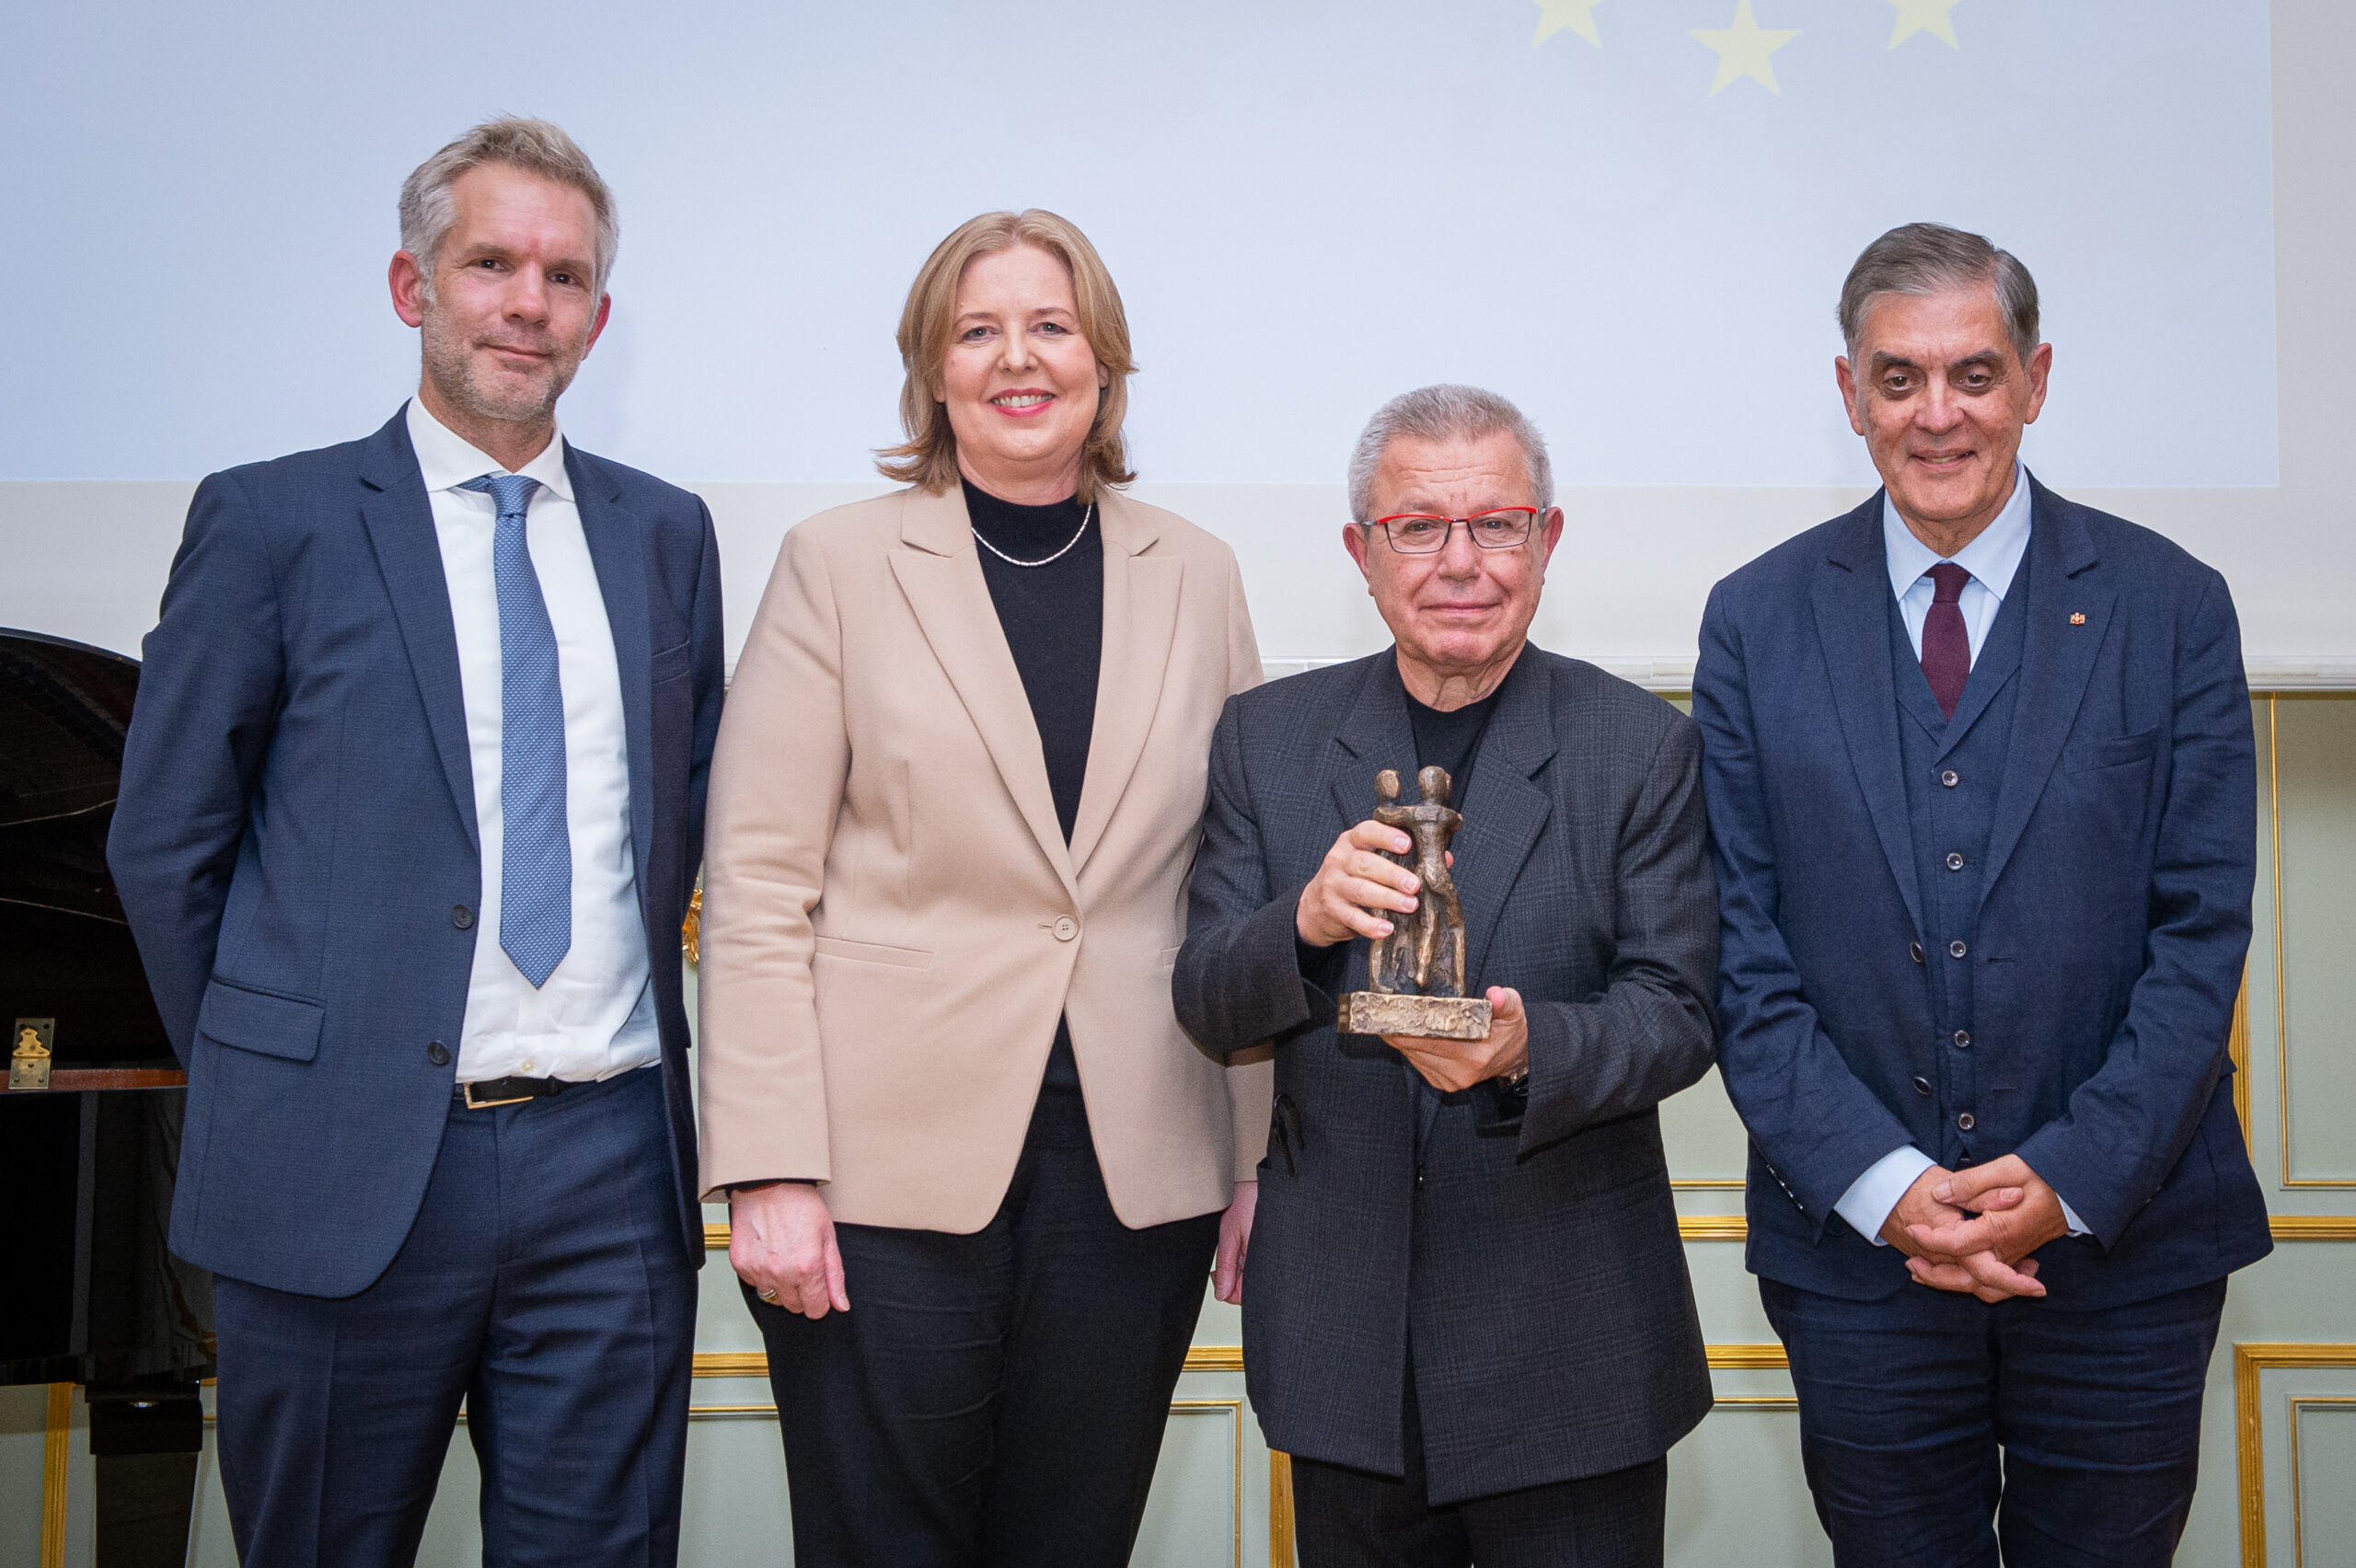 Markus Lautenschläger, Bärbel Bas, Daniel Libeskind and Romani Rose stand next to each other in a festive atmosphere during the award ceremony. Daniel Libeskind holds the bronze statue of the Civil Rights Award in his hands.